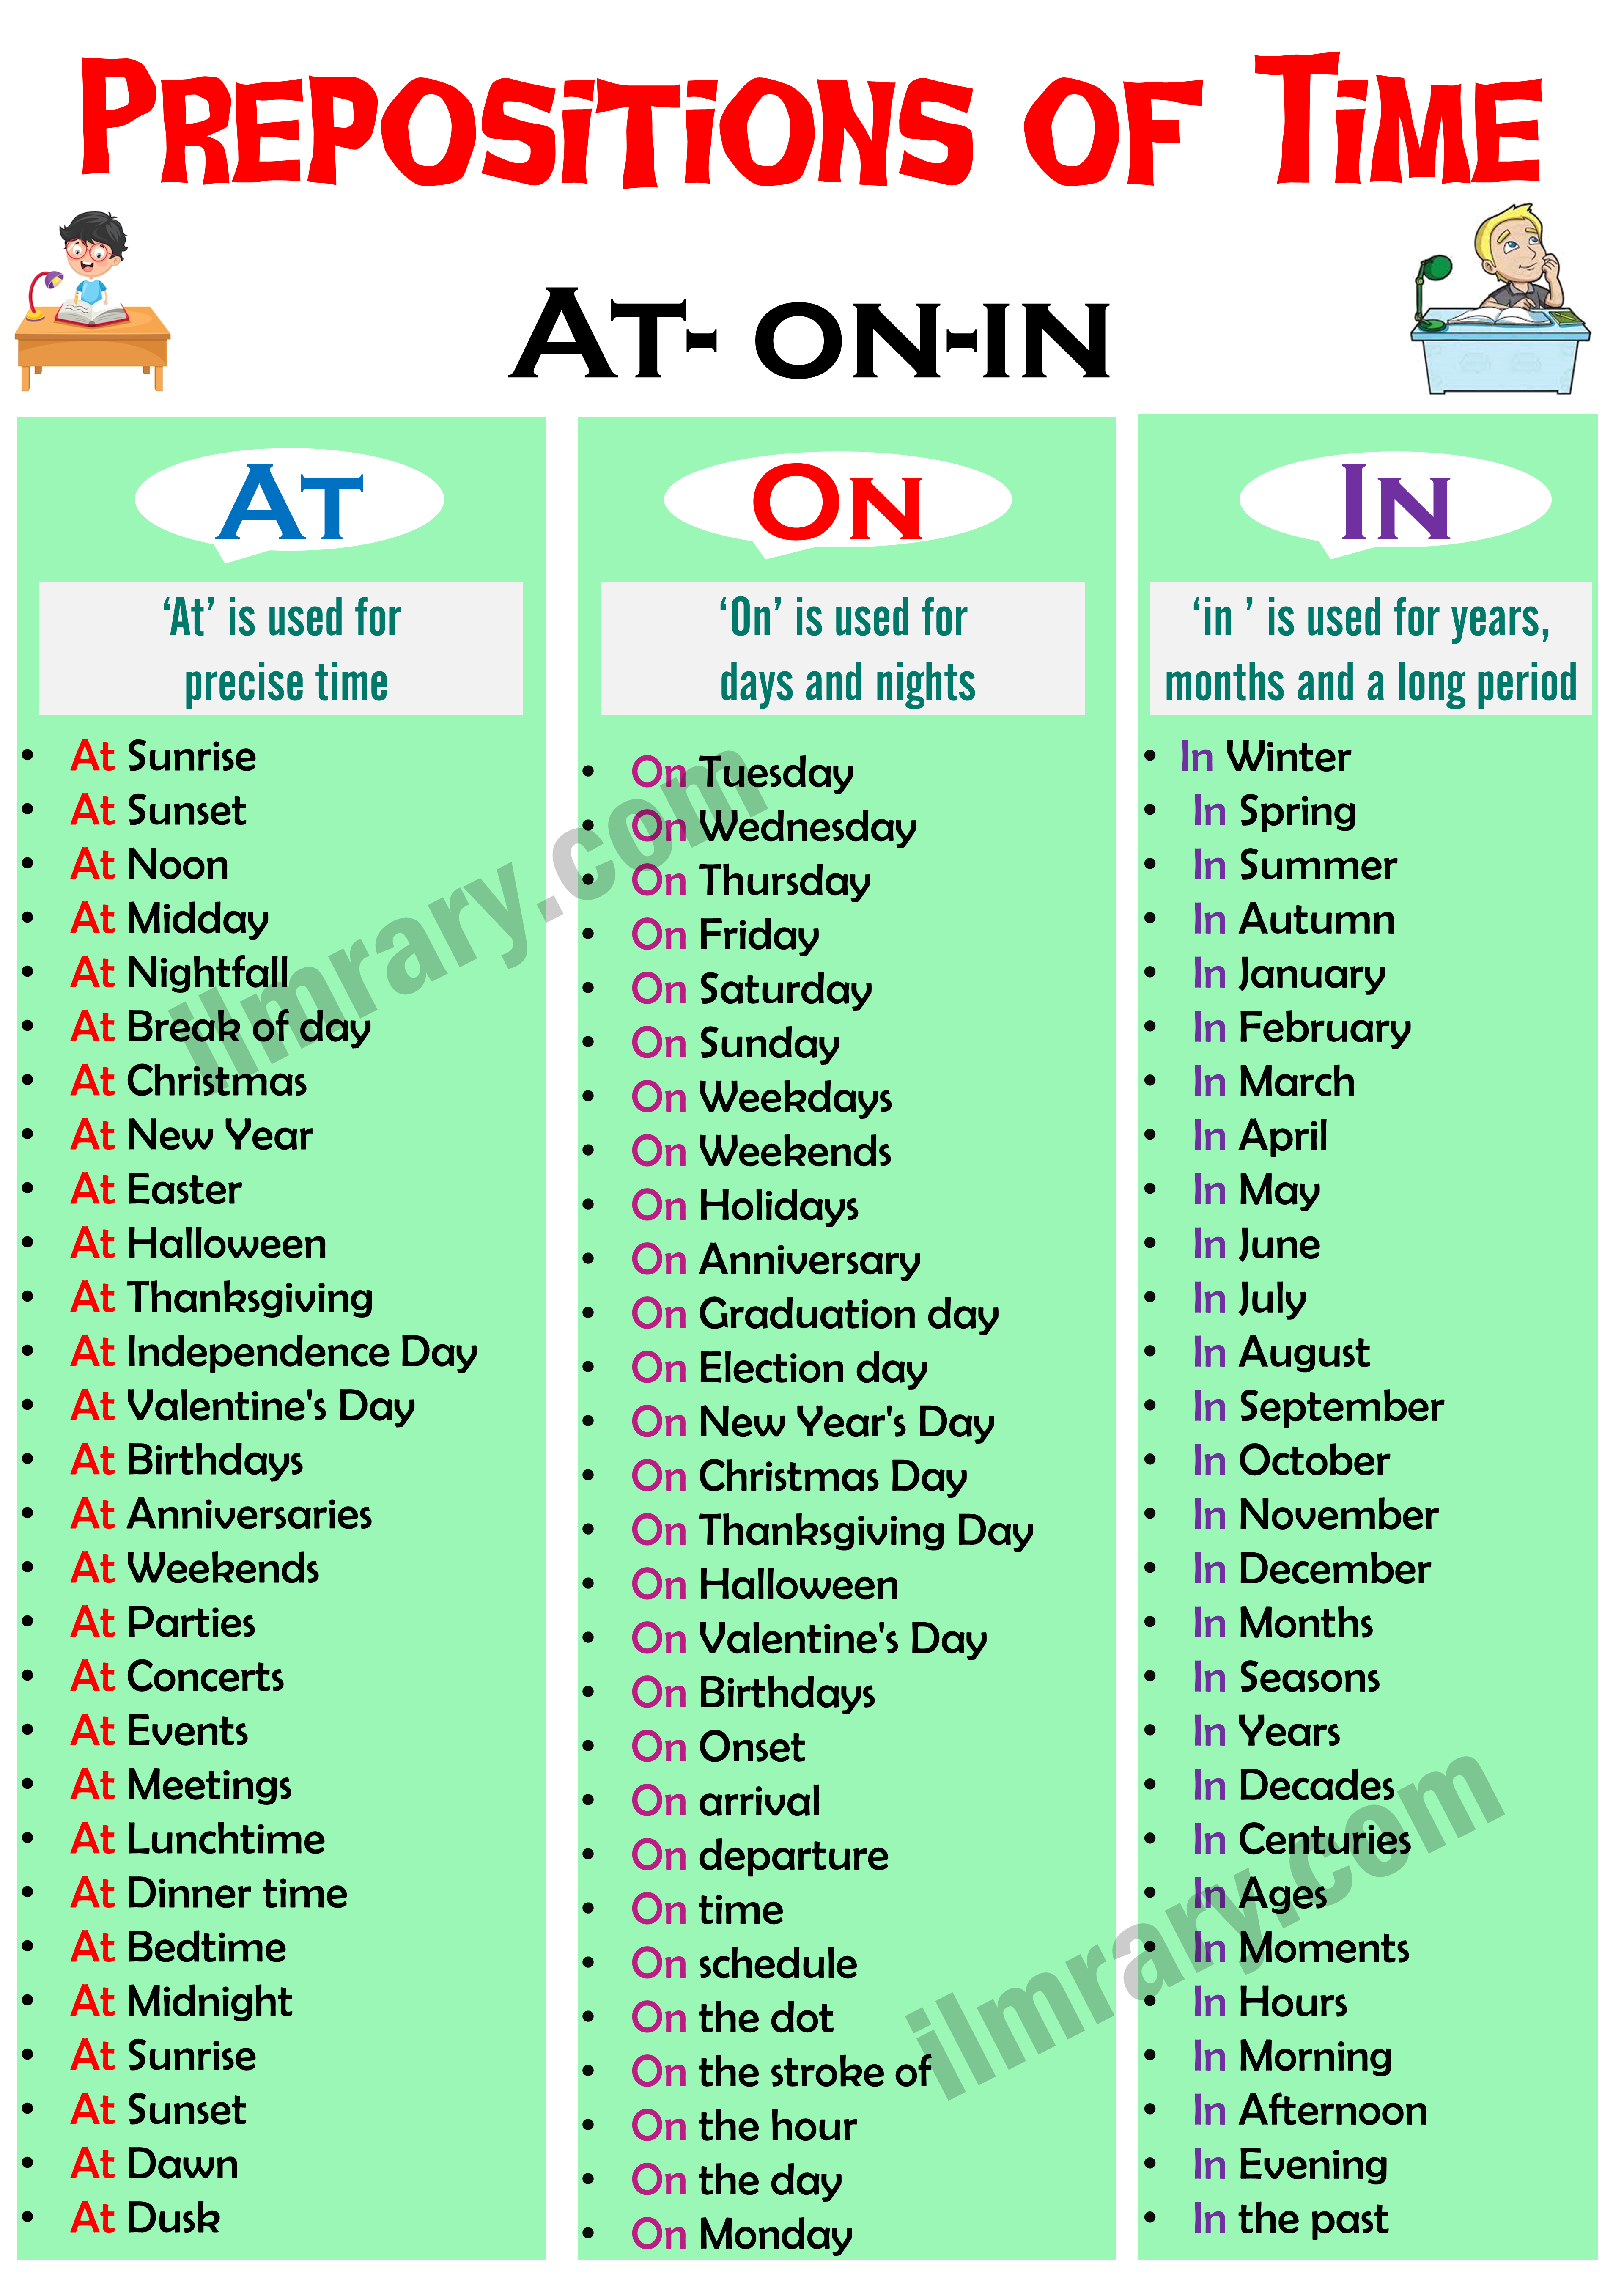 Preposition Definition | 100 Examples of Prepositions of time